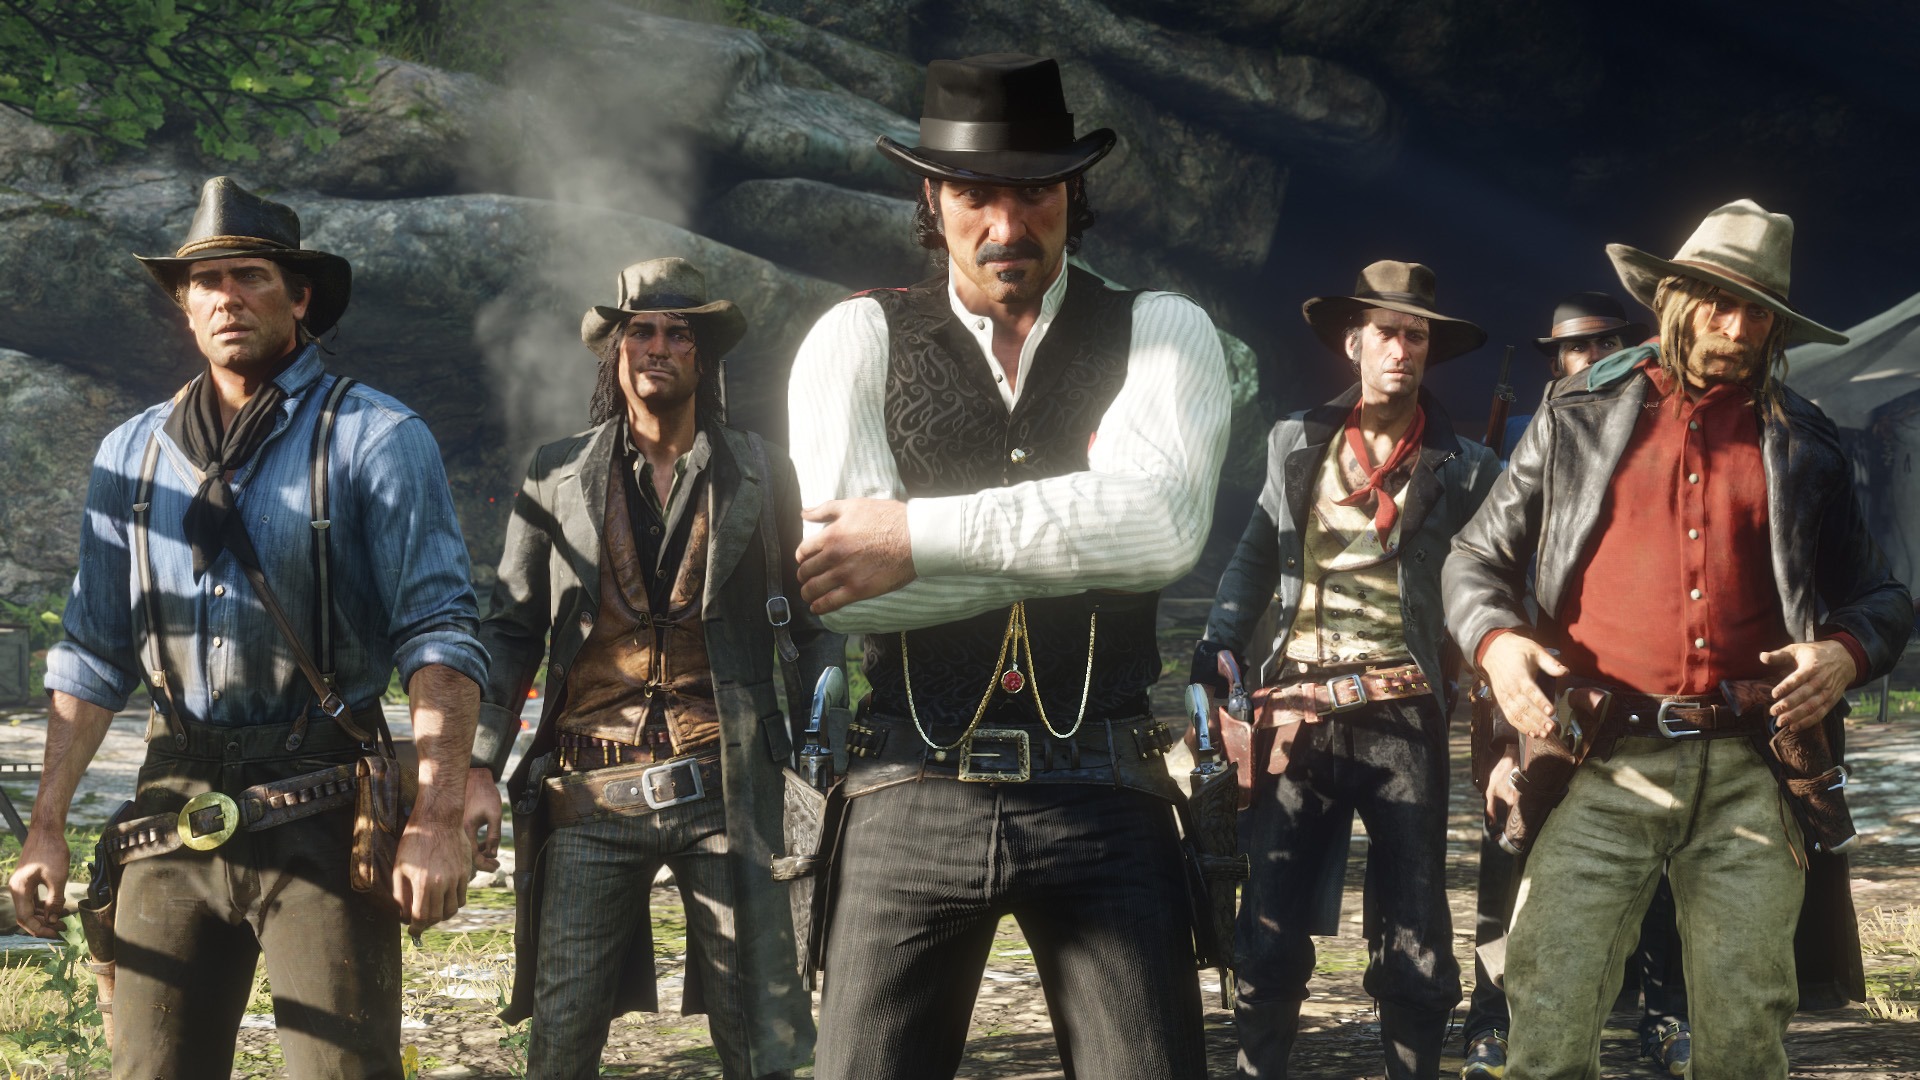 Second Red Dead Redemption Gameplay Trailer Goes Over The Van Der Gang's Illegal Activities -